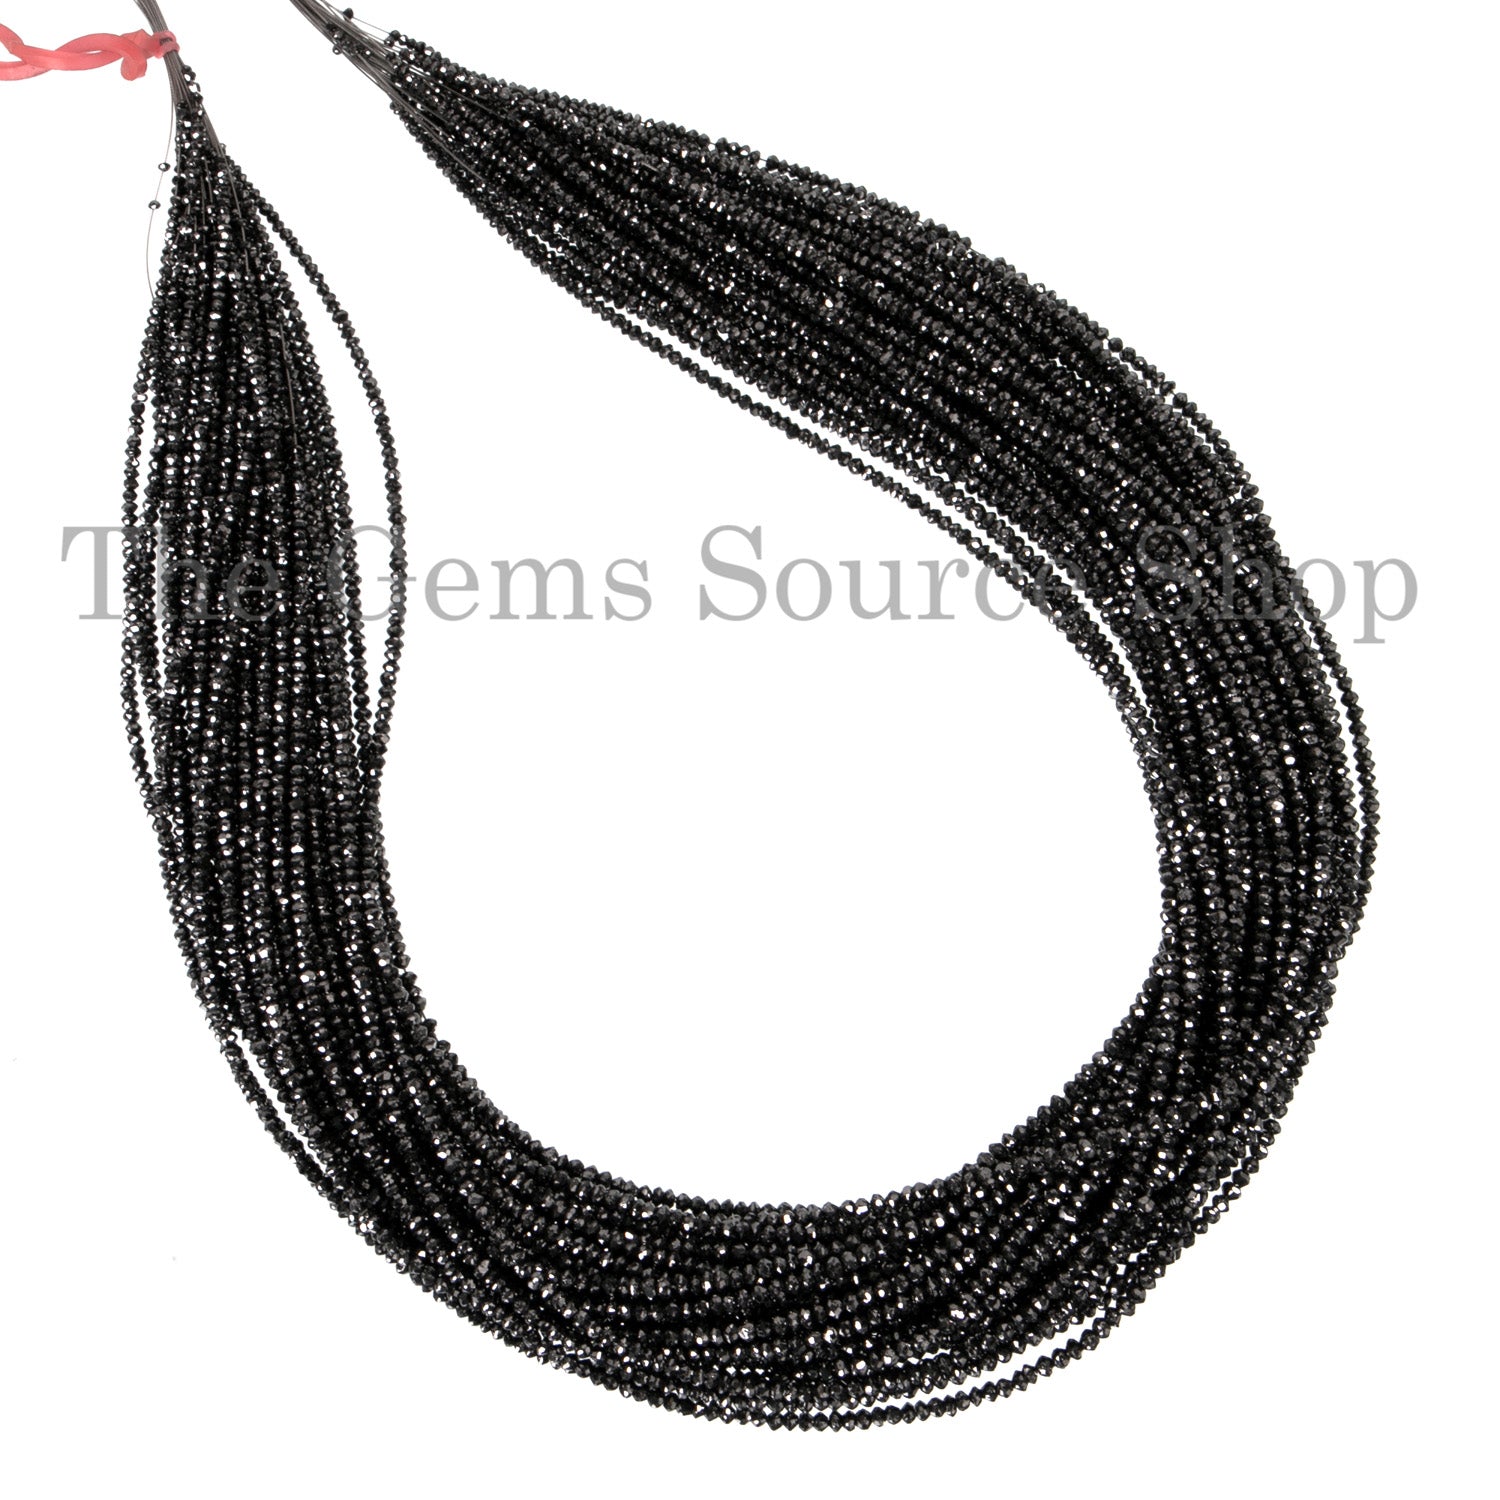 Top Quality Black Diamond Beads Faceted Rondelle, Black Diamond Beads, Natural Diamond Beads